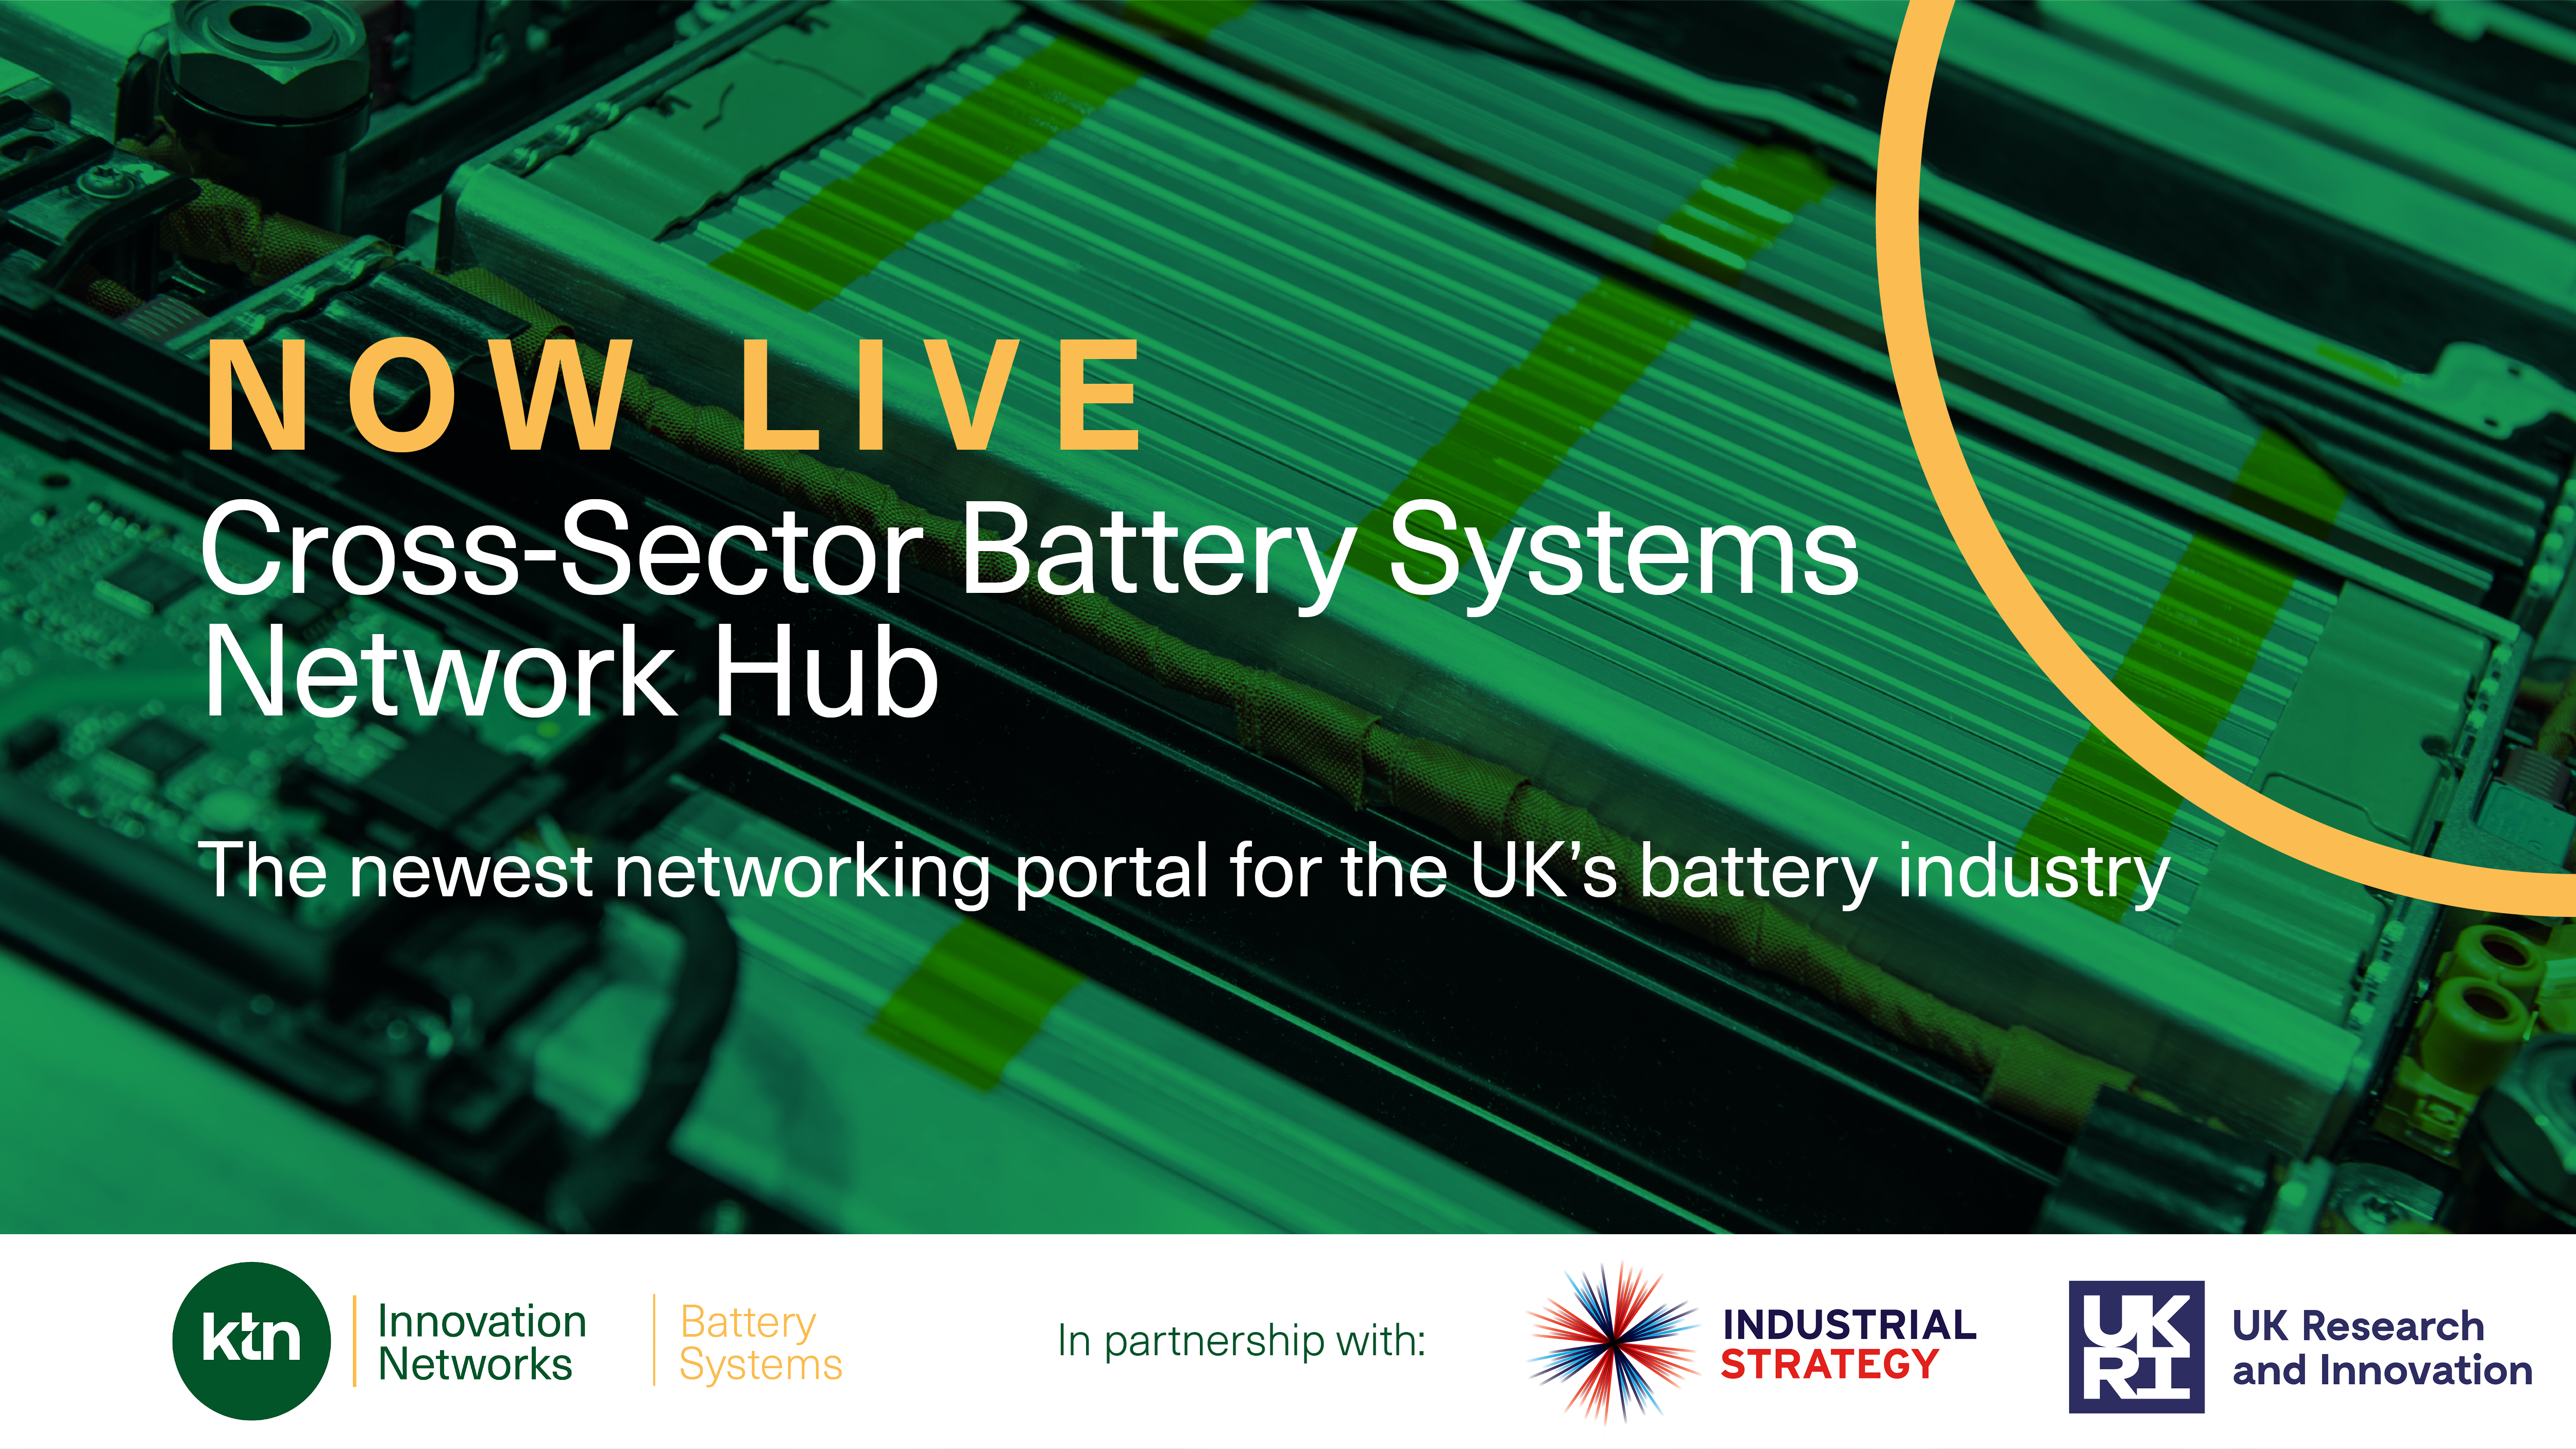 The Cross-Sector Battery Systems Community Hub has officially launched